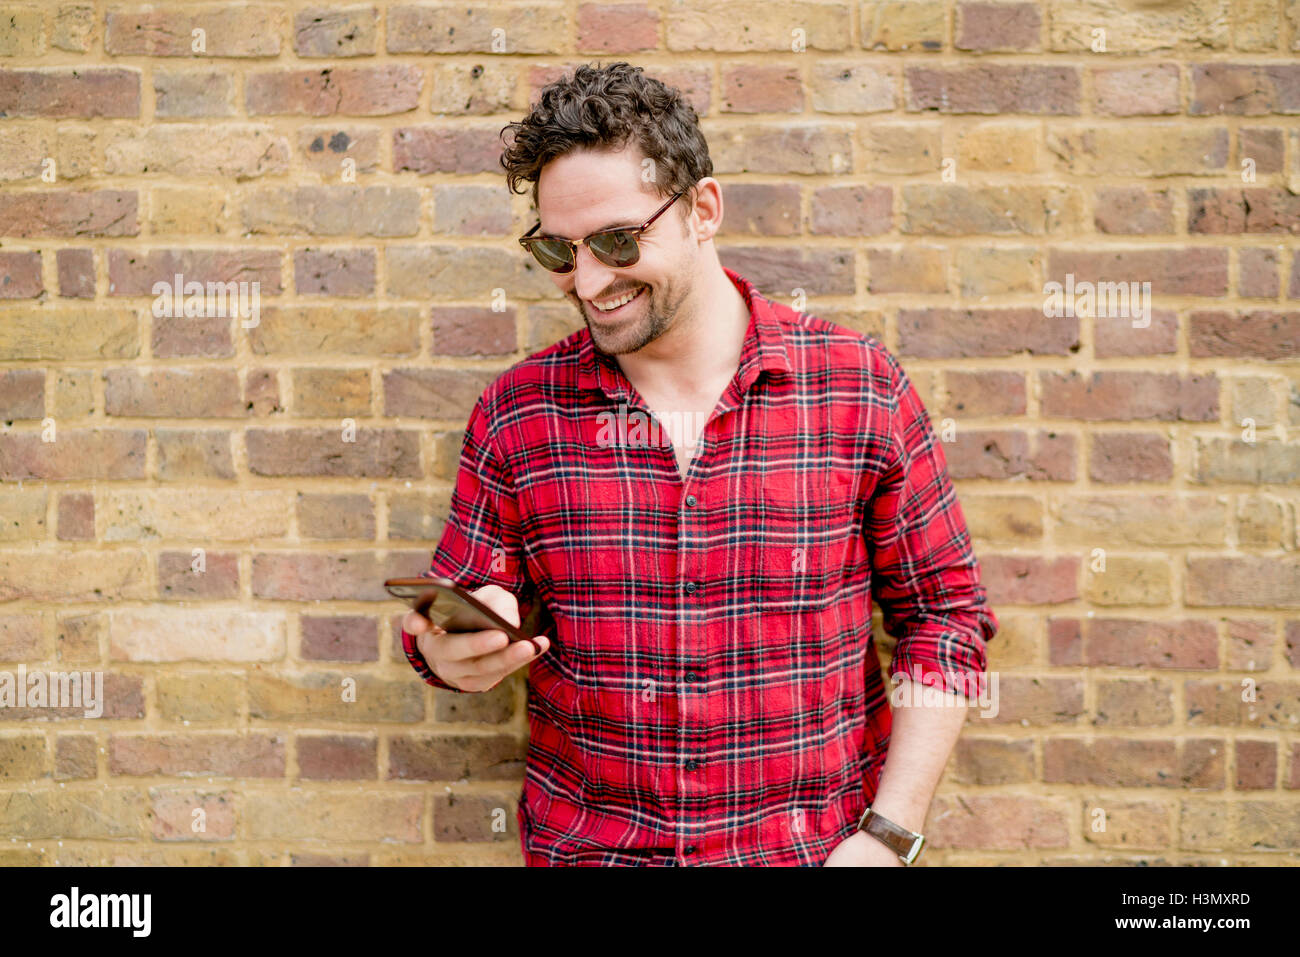 Young man leaning against brick wall reading smartphone texts Stock Photo